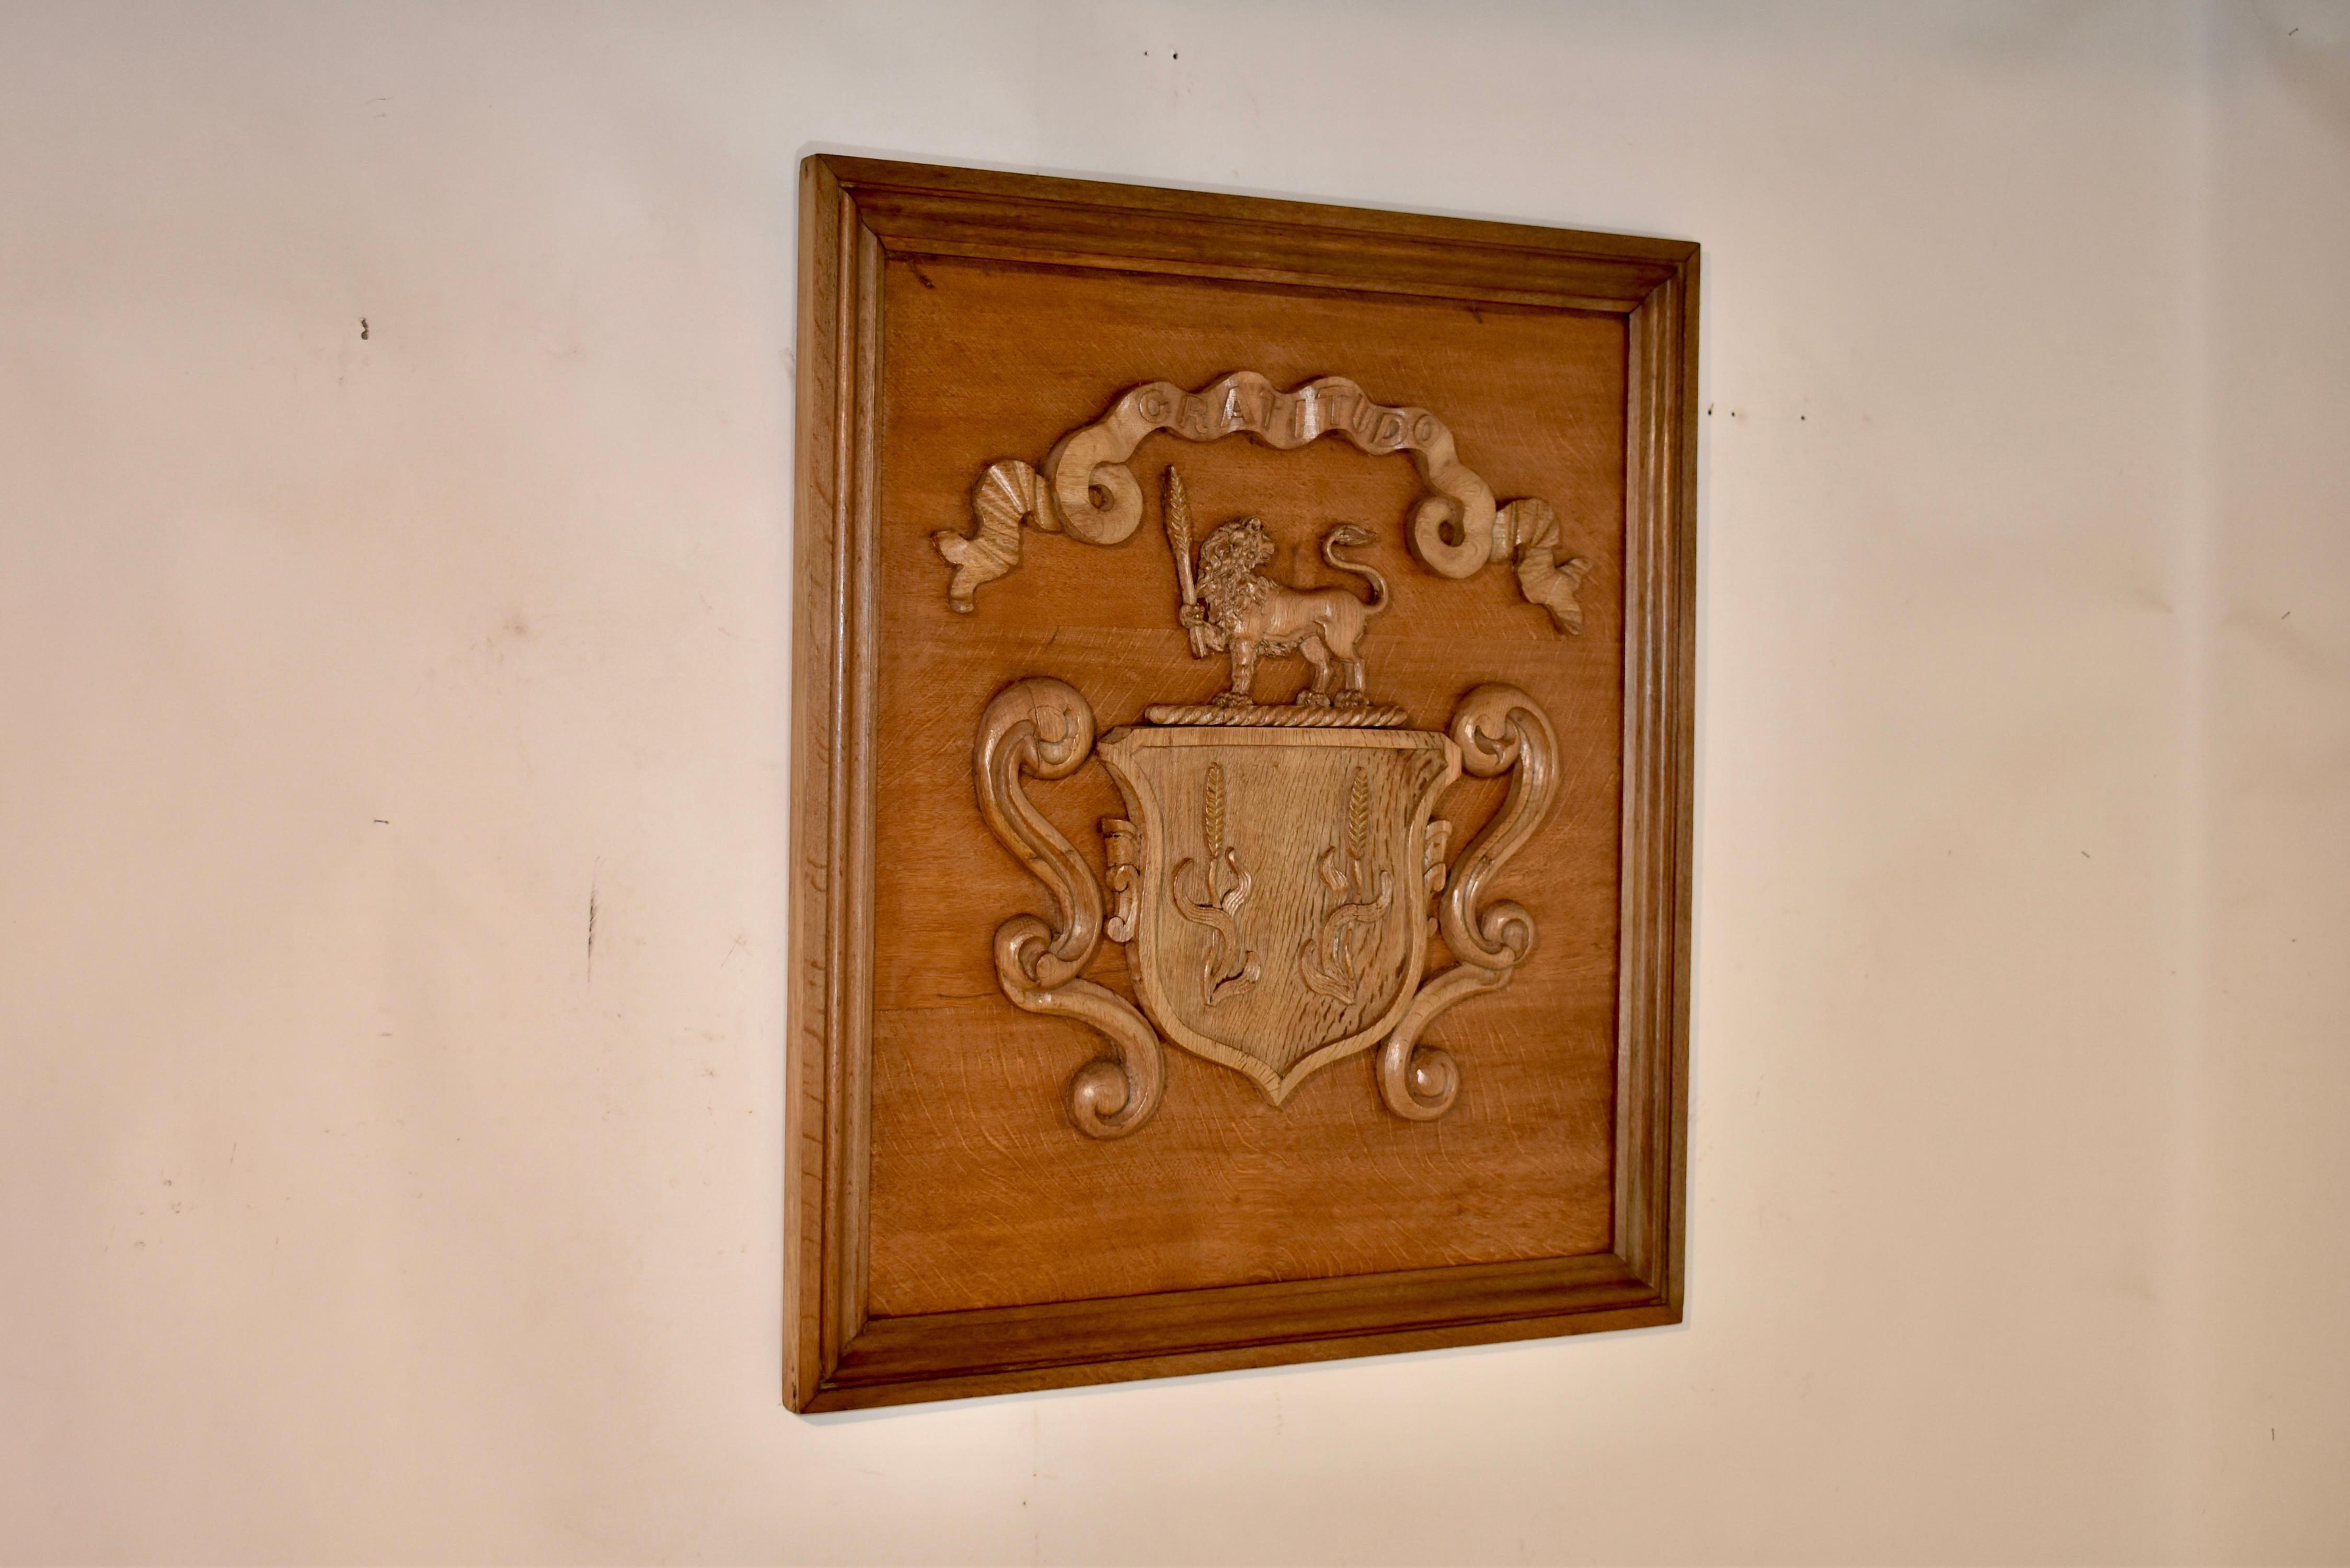 19th century oak hand carved framed armorial from England. The central design is of a shield with two wheat shafts, flanked by decorative scrolls, and topped with a regal standing lion, also holding a shaft of wheat. Over the top of the crest is a